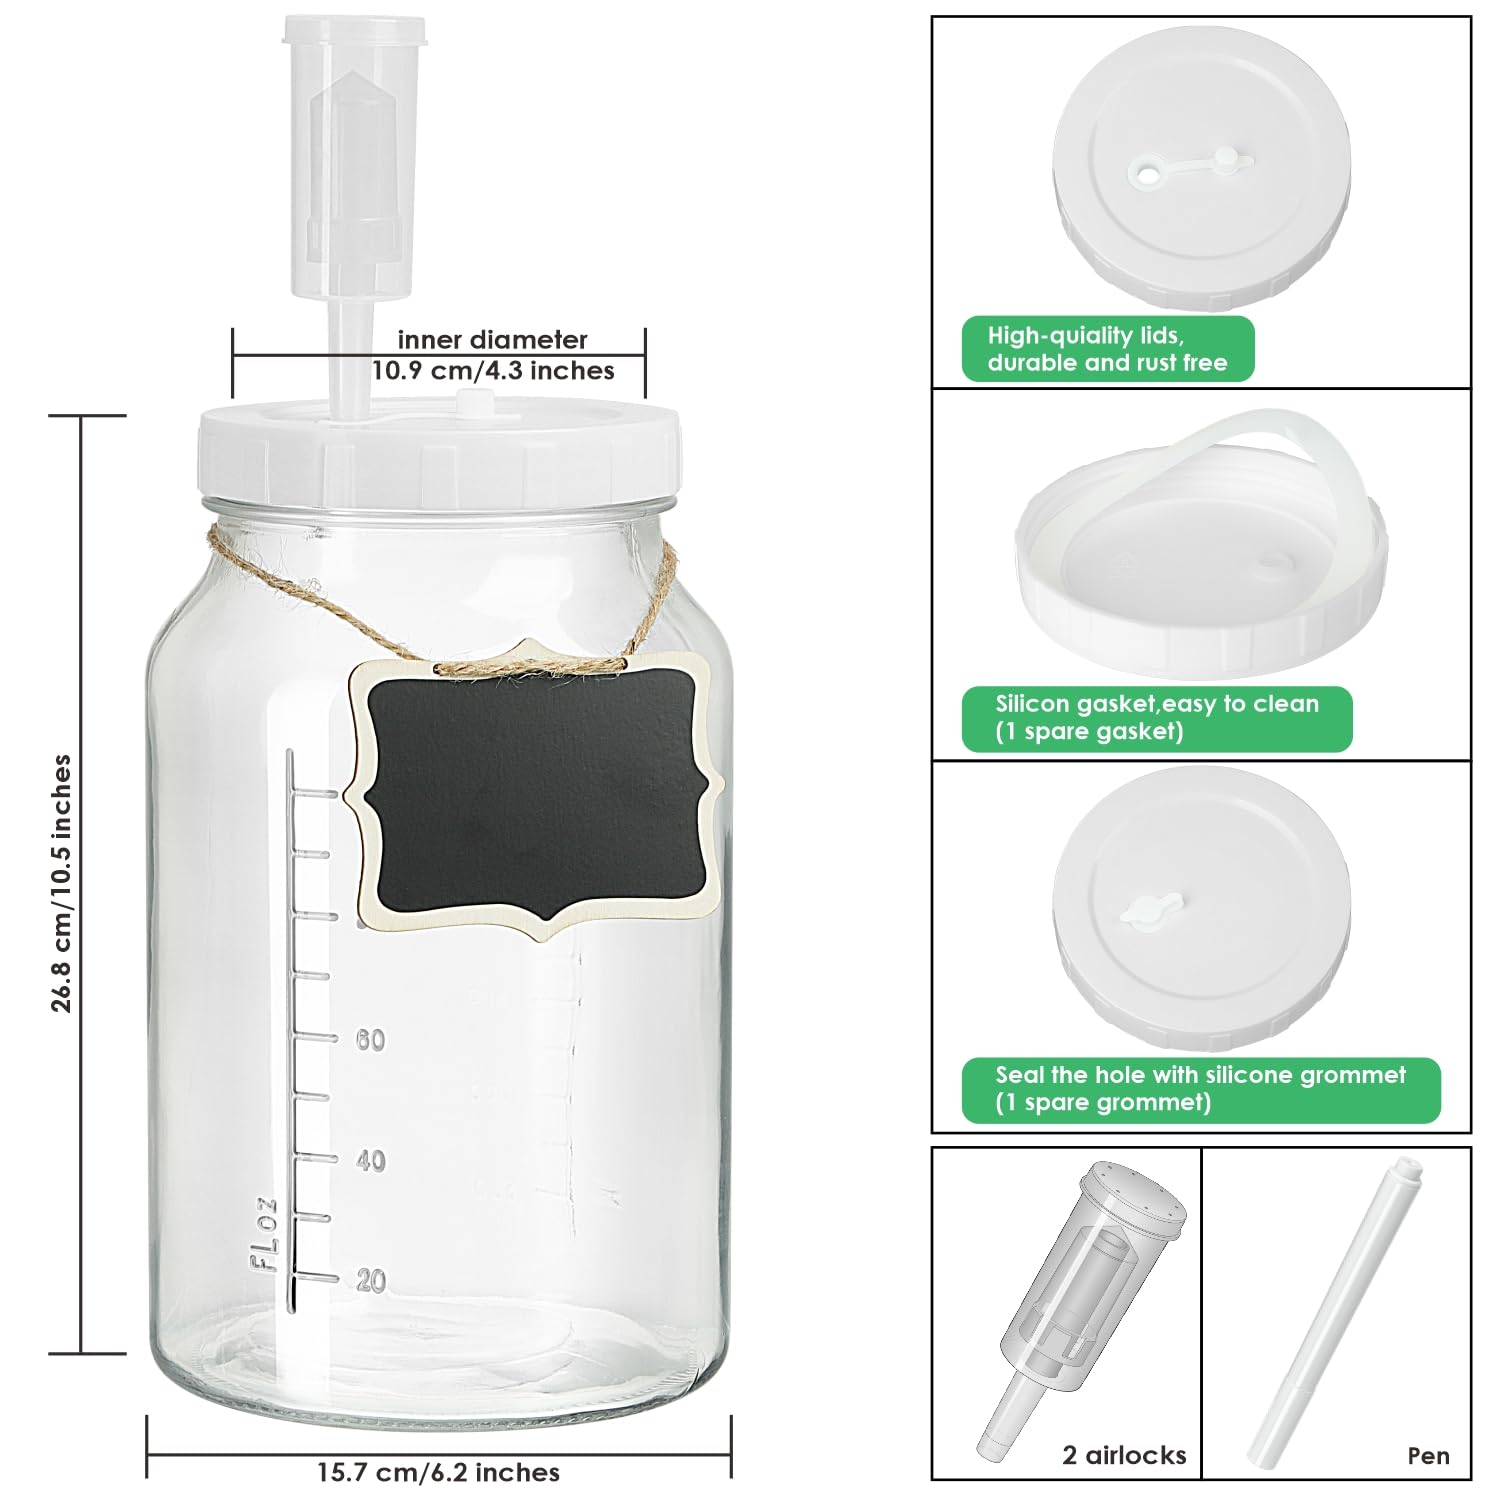 1 Gallon Large Fermentation Jars w 2 Airlocks and 1 SCREW Lid - 100% Airtight Heavy Duty Lid w Silicone 2 Gaskets & 2 Grommets - Wide Mouth Glass Jars w Scale Mark - Pickle Jars for Sourdough Starter